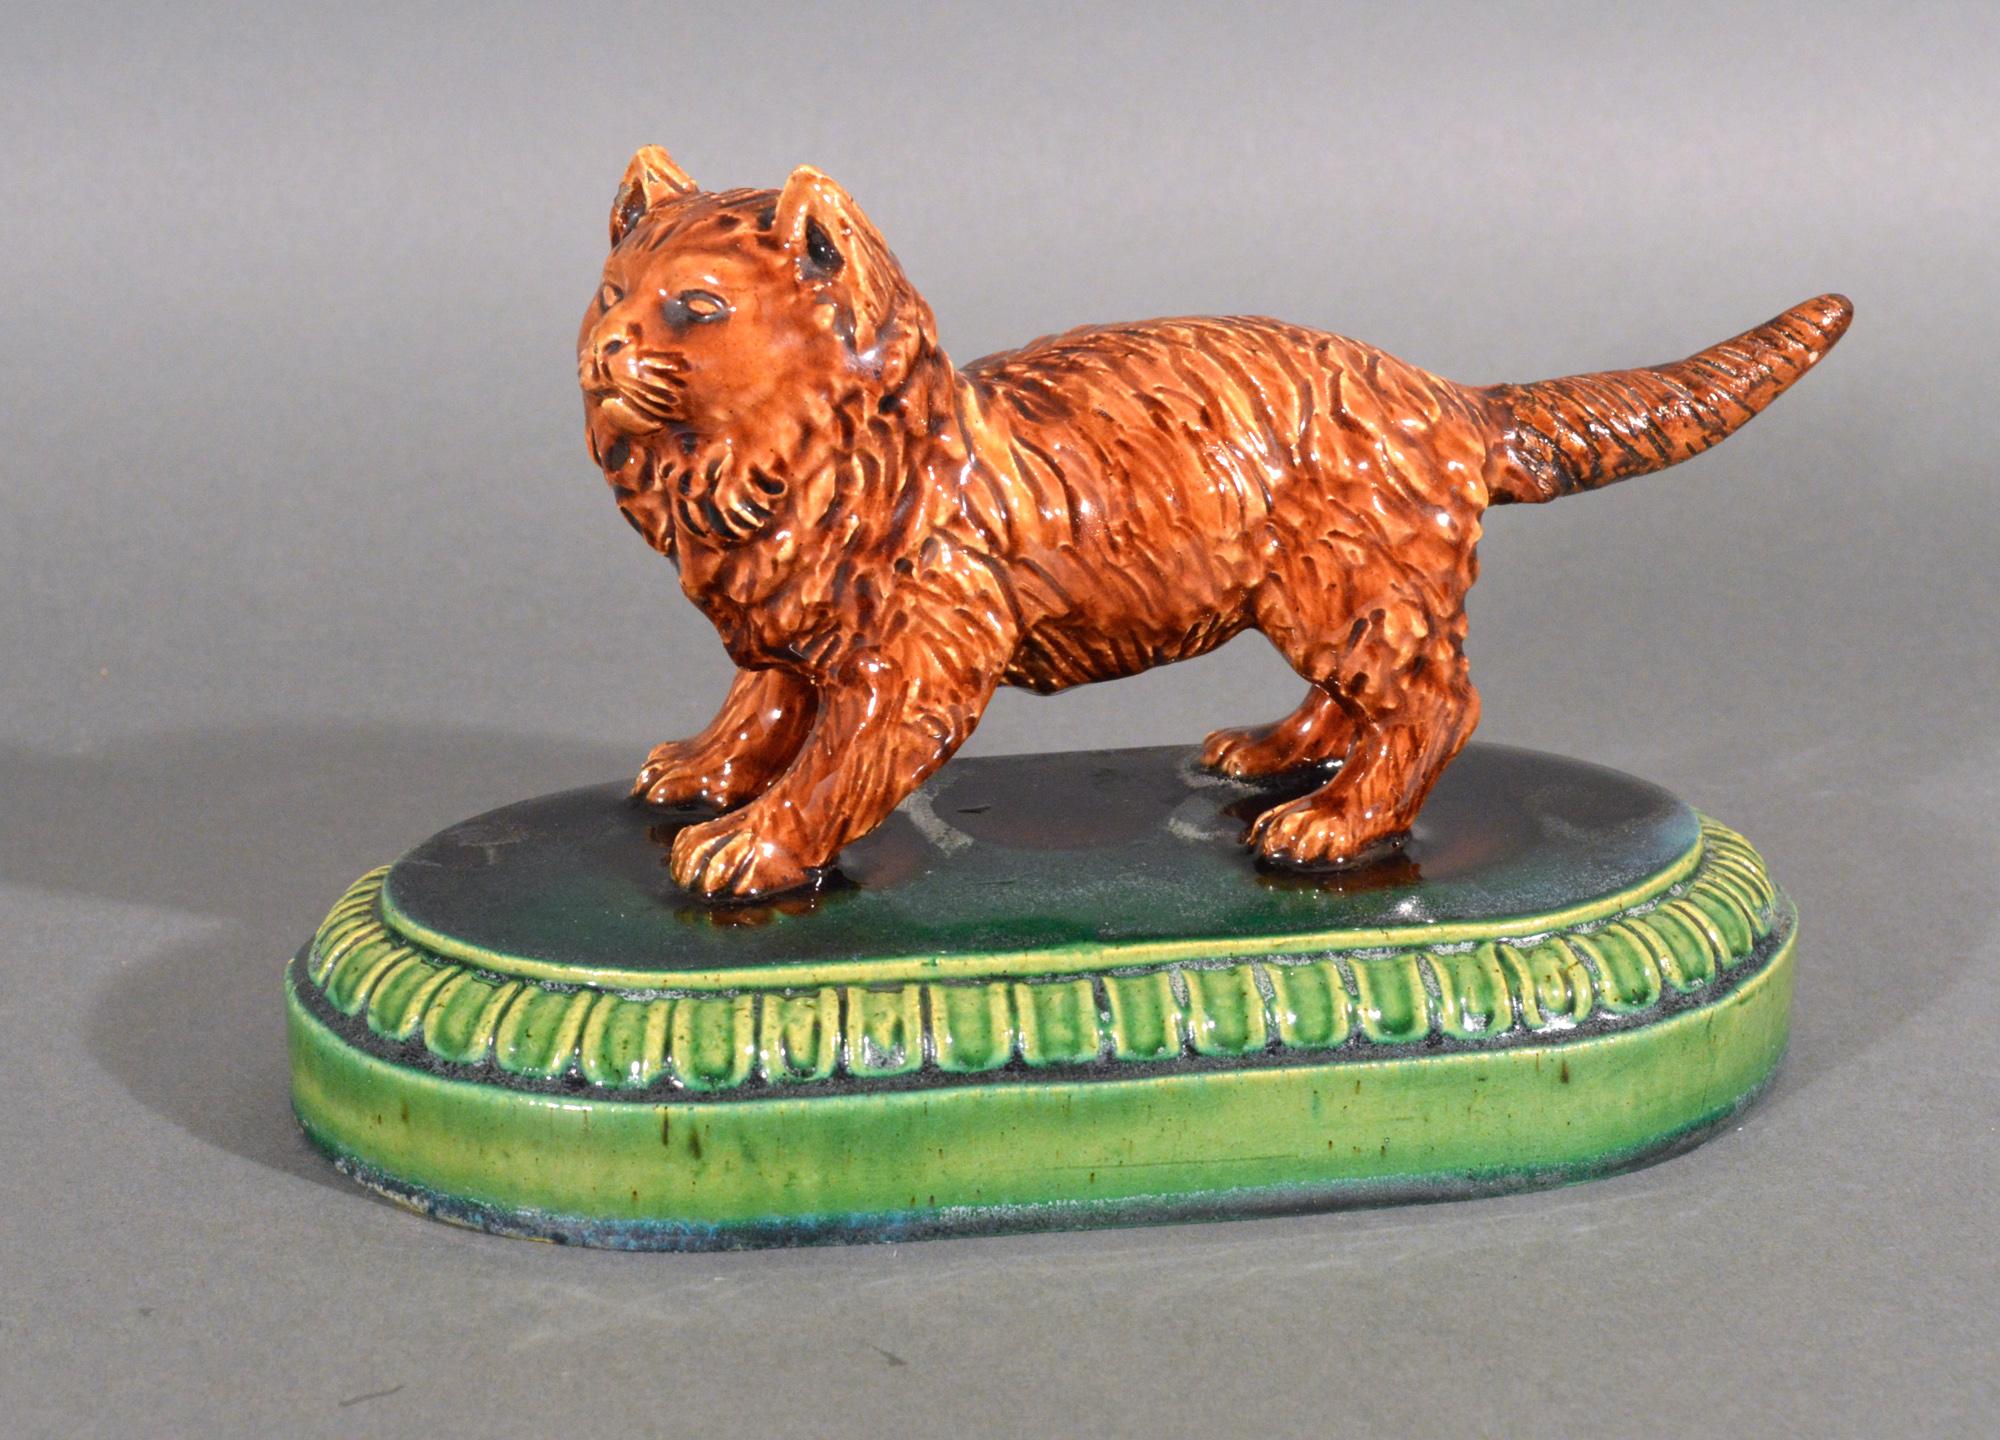 Majolica Model of a Cat,
Earthenware with Majolica Glaze,
Possibly William Brownfield,
19th Century

The figure of a cat is modeled as an orange-brown cat with almost a mane. It is posed as though it is about to pounce with it ears perked and tail